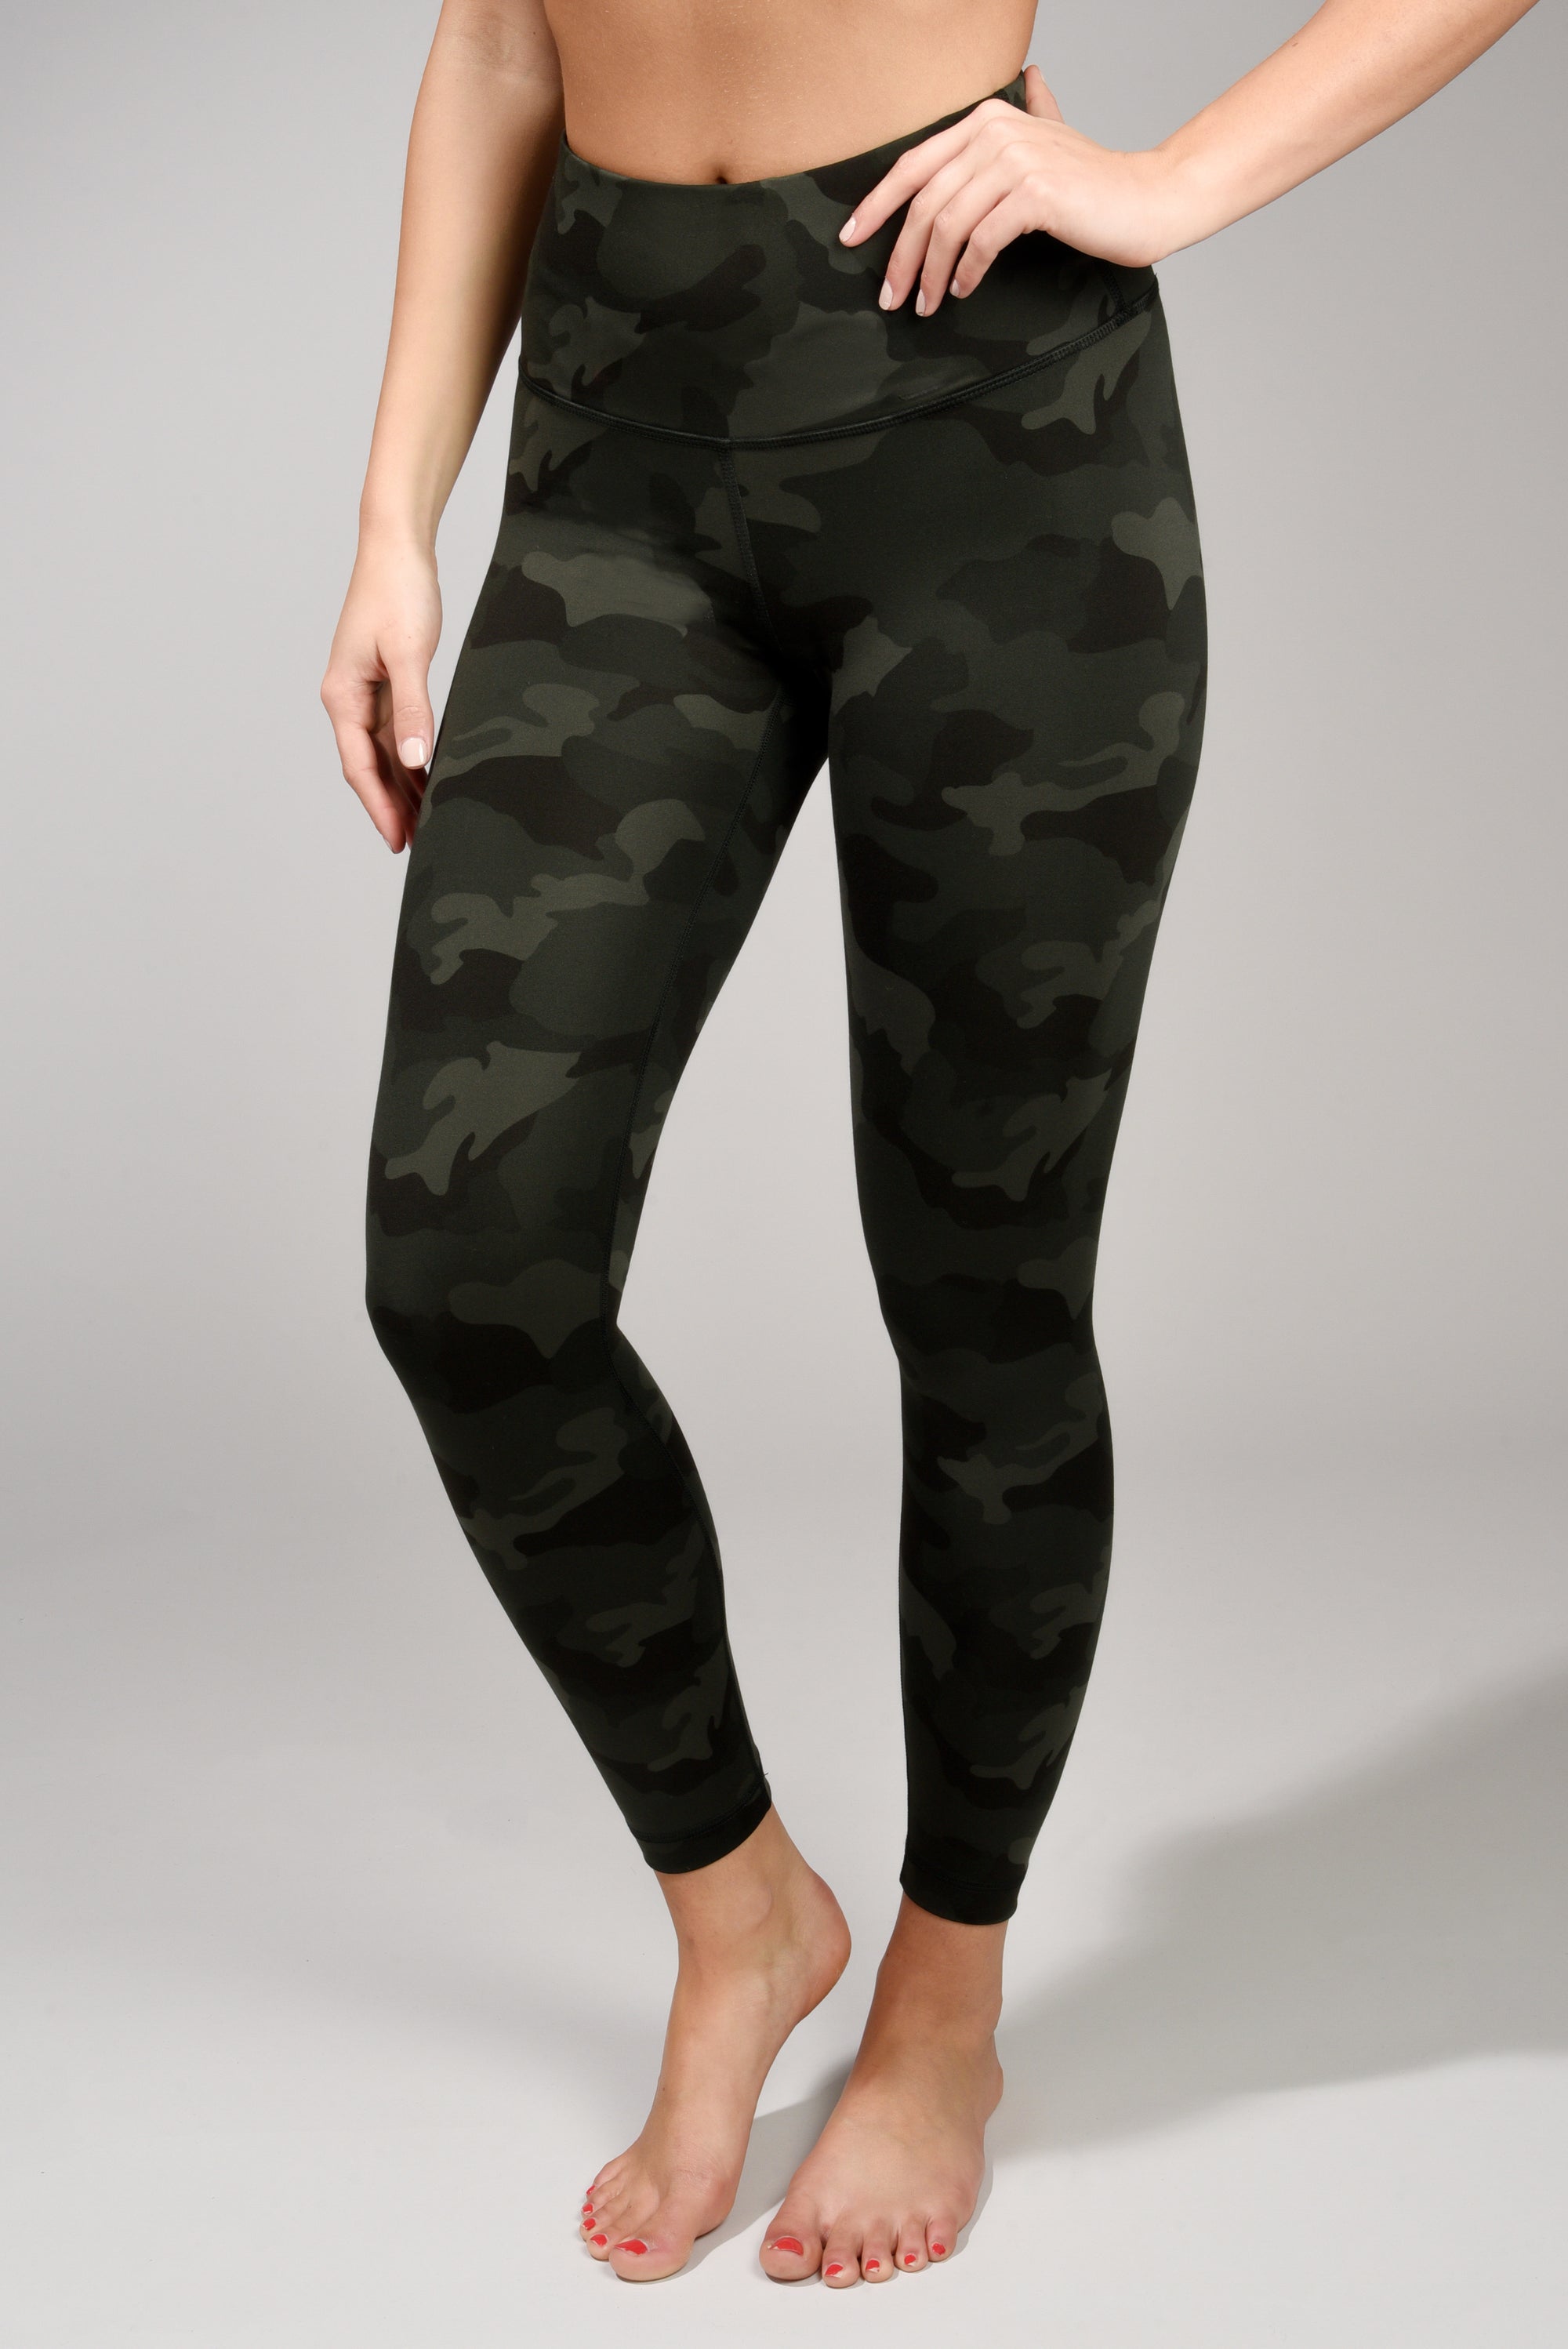 Yogalicious LUX High Waist Ankle Leggings Pants Camo Army Green